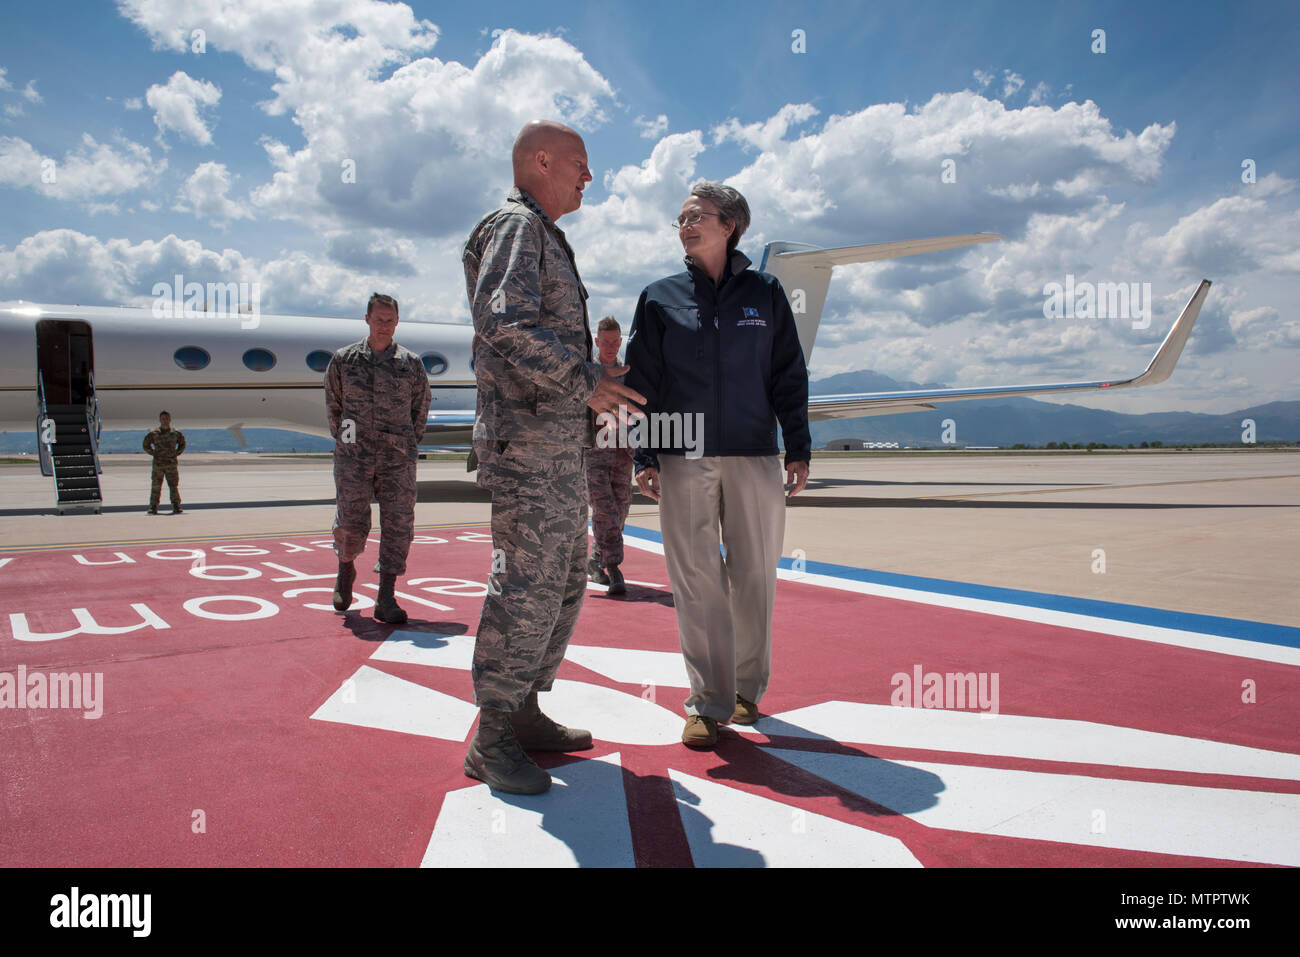 PETERSON AIR FORCE BASE, Colo. - U.S. Secretary of the Air Force Heather Wilson speaks with Gen. Jay Raymond, Air Force Space Command commander, on the flightline after arriving at Peterson Air Force Base, Colorado May 22, 2018. Wilson is attending the North American Aerospace Defense Command and Northern Command change of command ceremony where Air Force Gen. Terrence J. O'Shaughnessy will accept command from Air Force Gen. Lori J. Robinson. (DoD Photo by Senior Airman Dennis Hoffman) Stock Photo